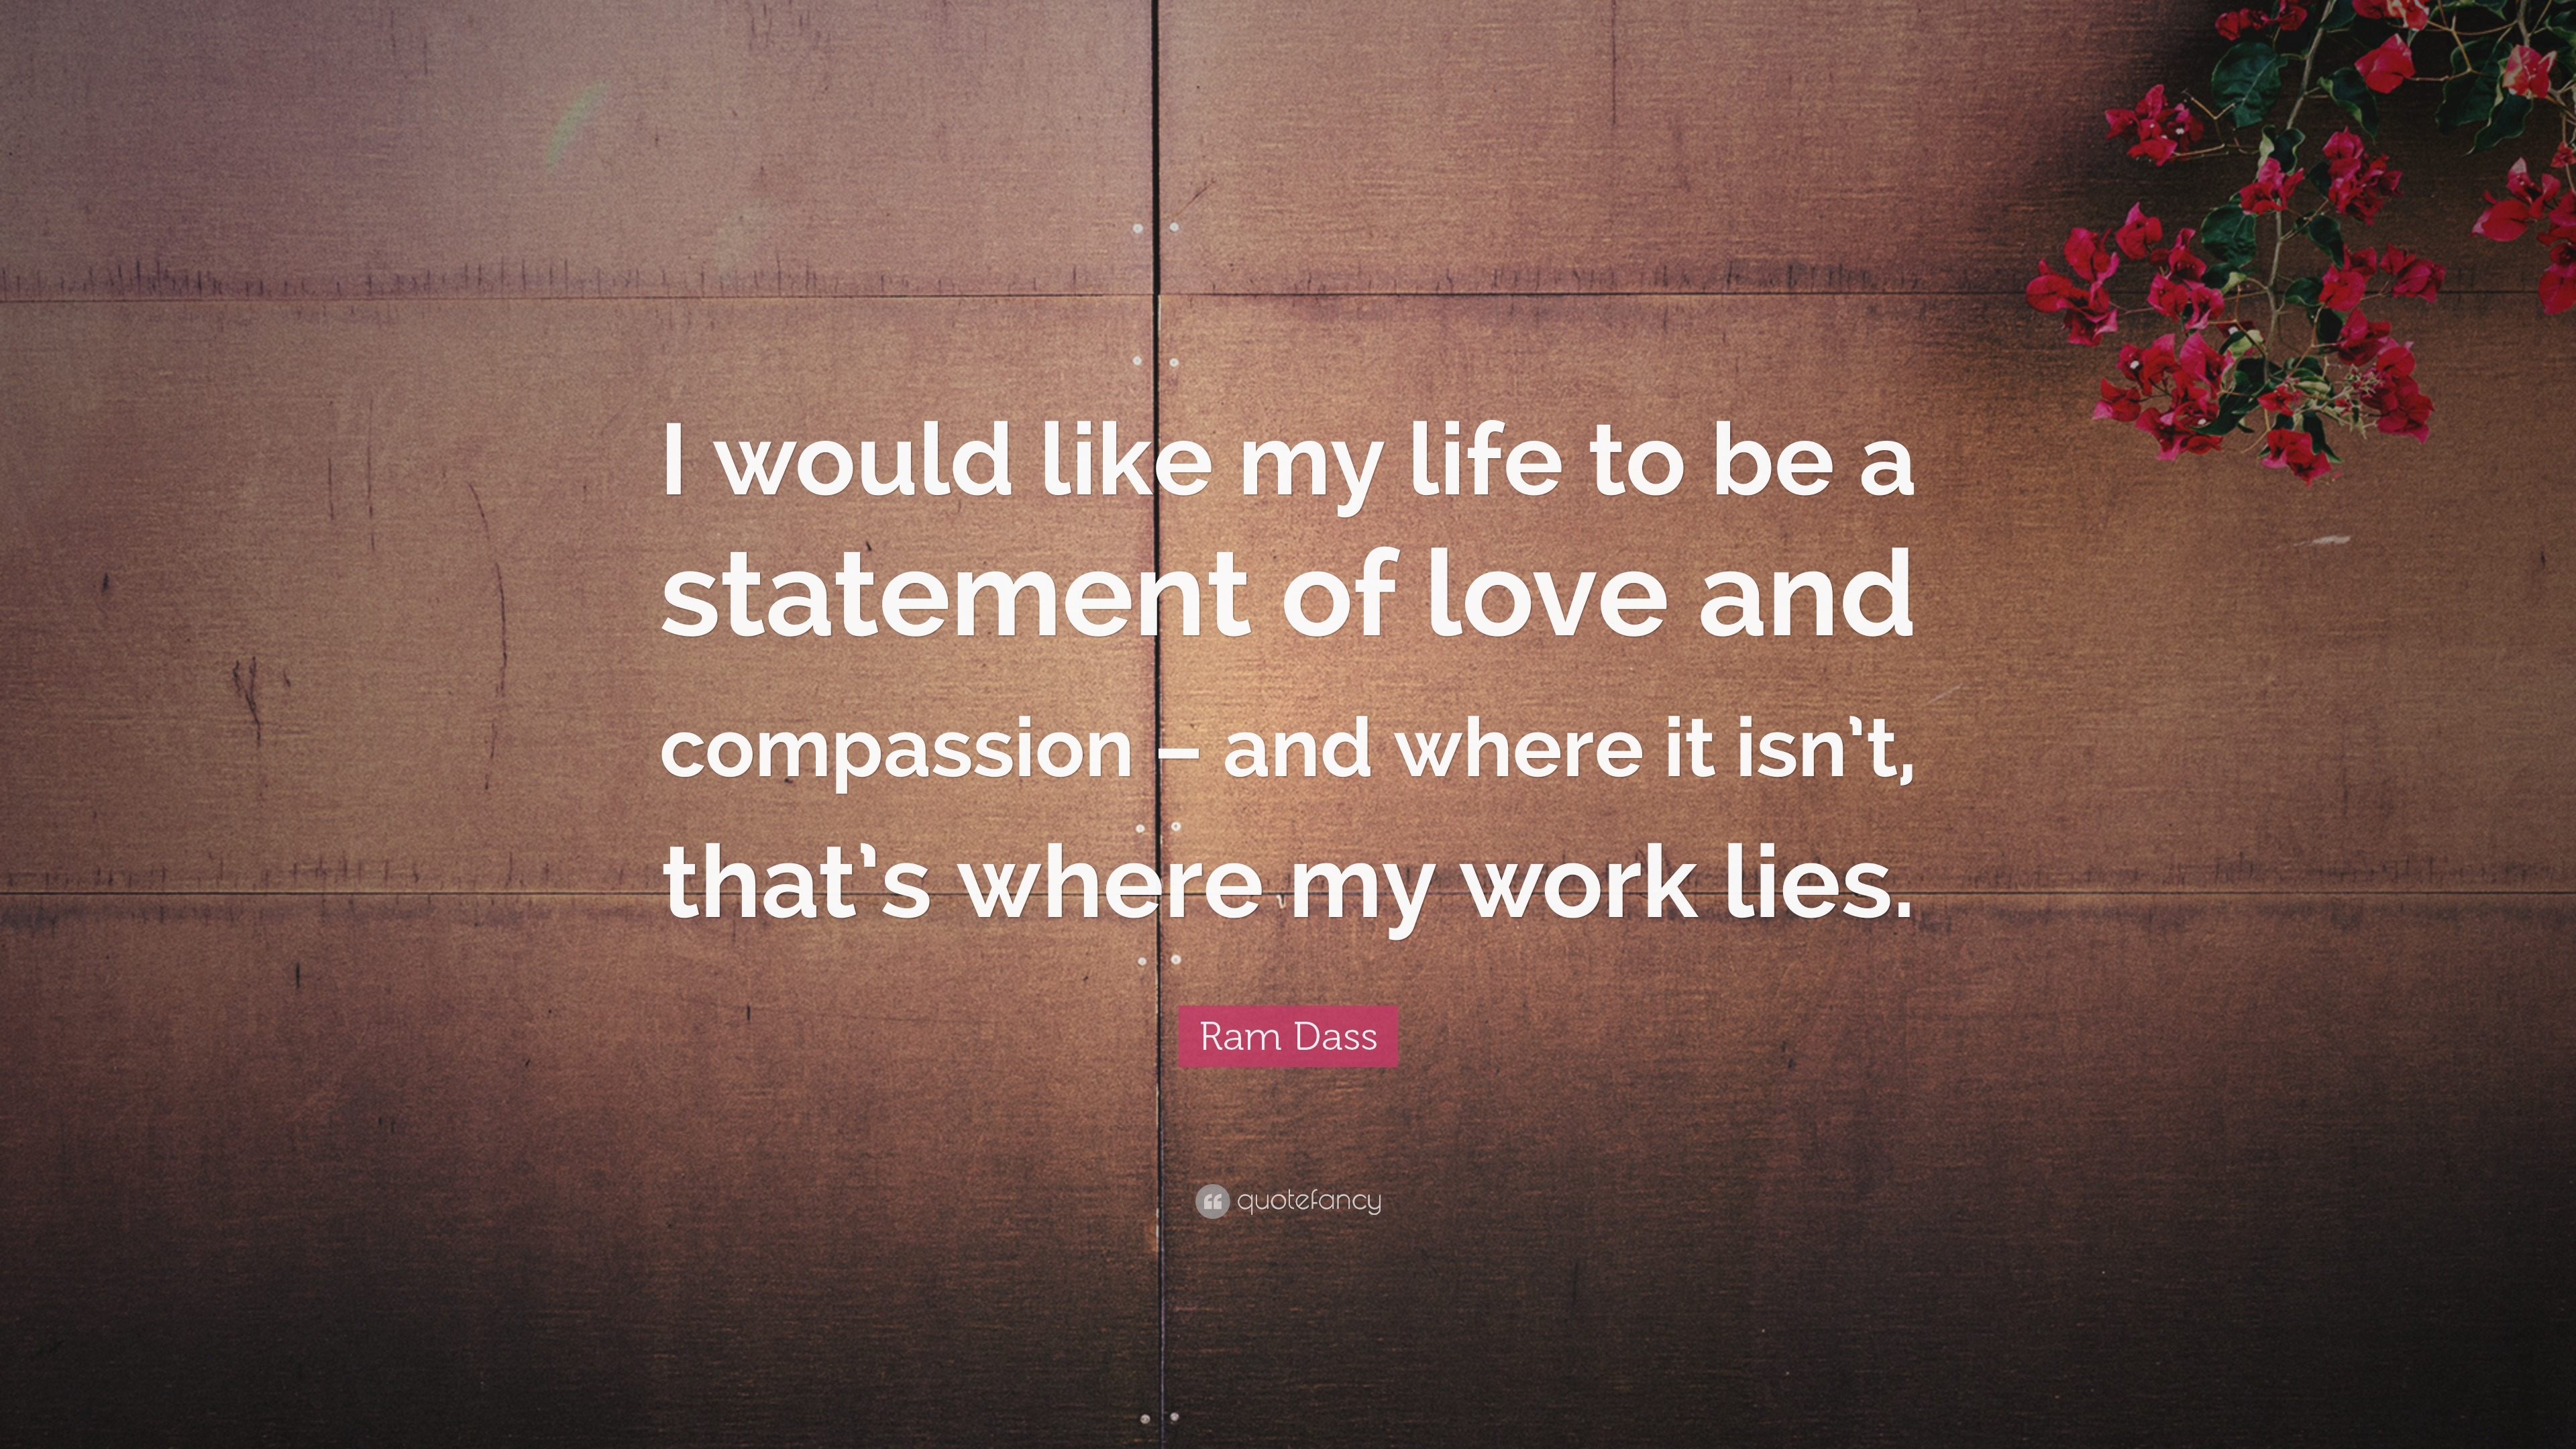 Ram Dass Quote: "I would like my life to be a statement of ...